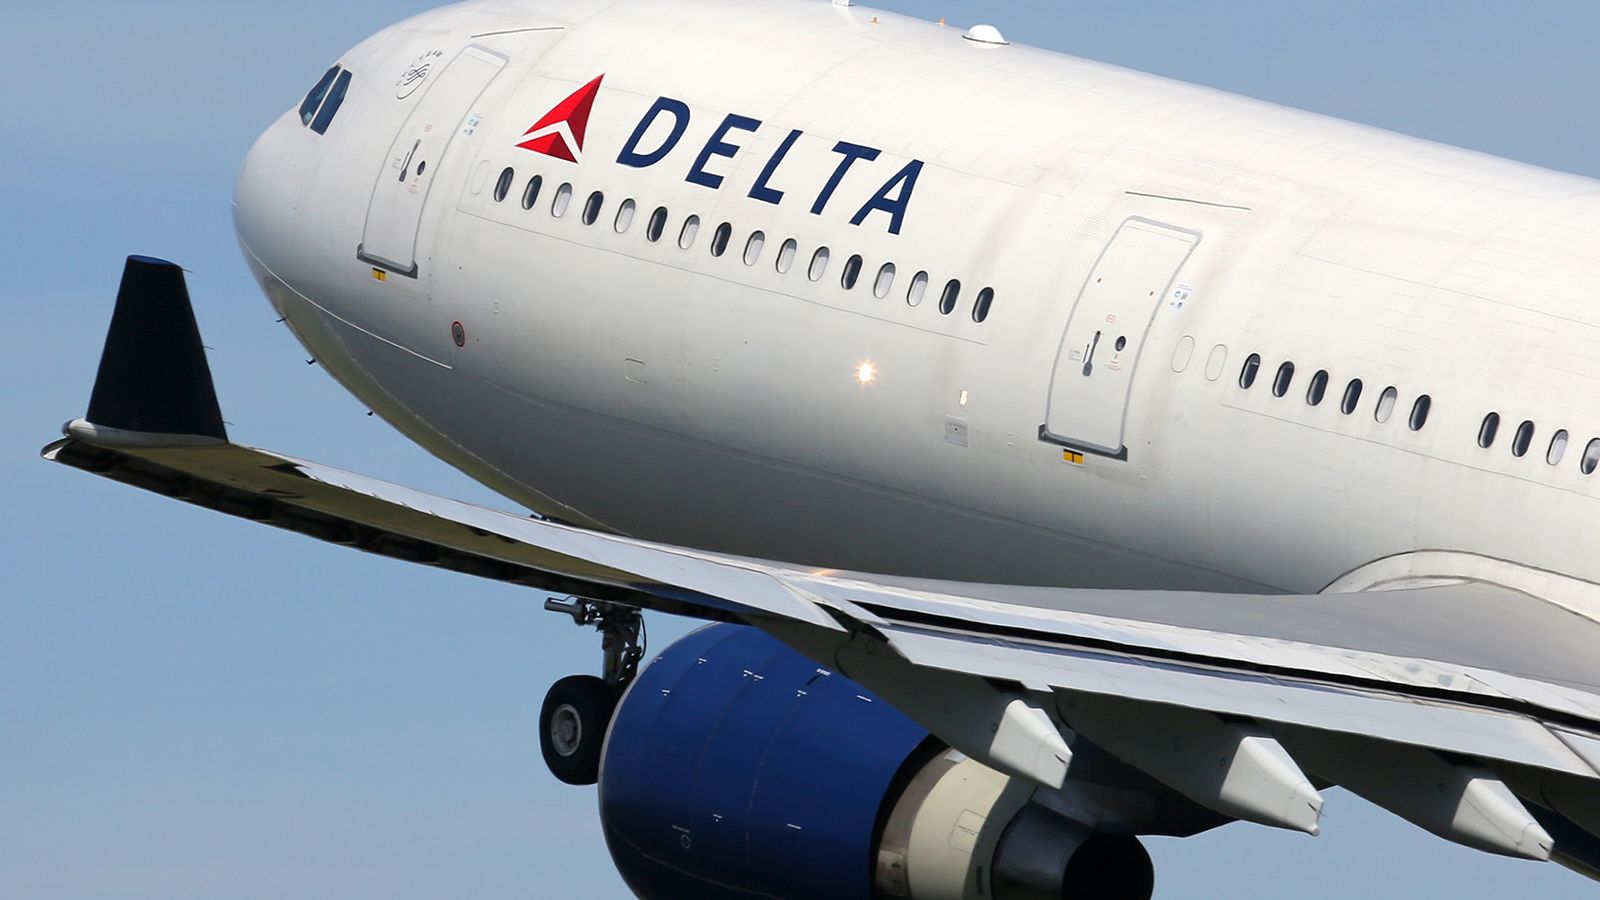 Last chance to score up to 110,000 bonus miles with these Delta credit card offers | CNN Underscored